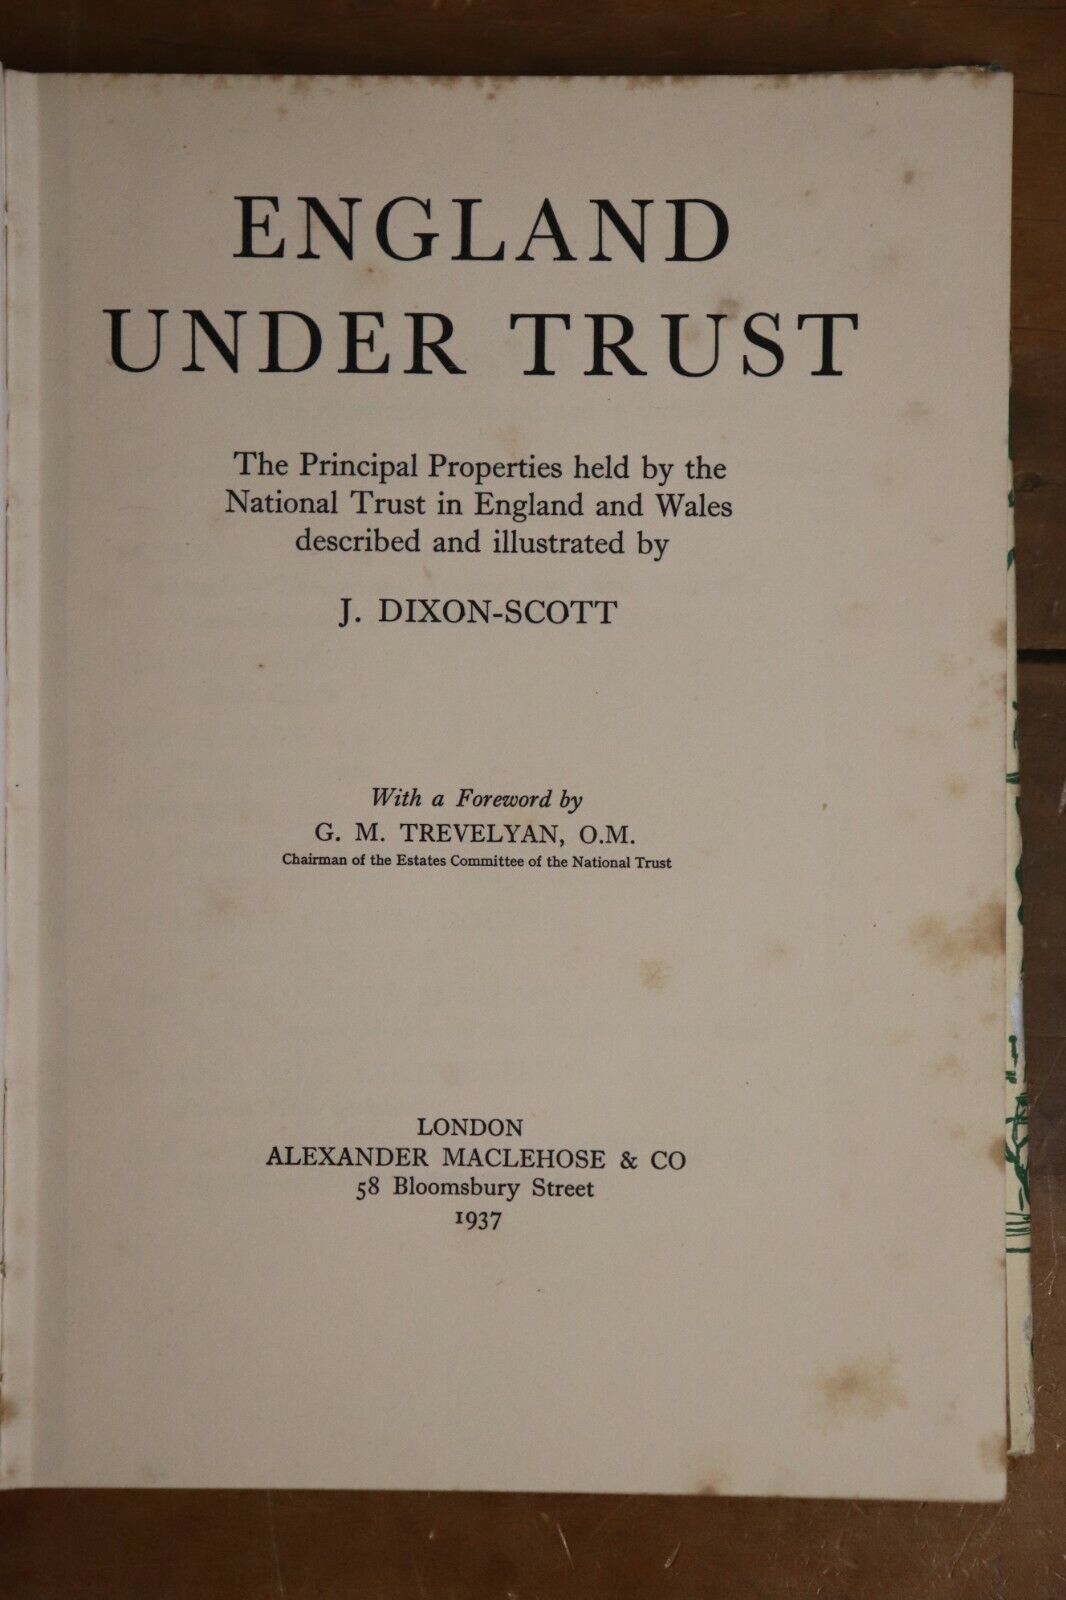 England Under Trust - 1937 - Antique History Book - 1st Edition